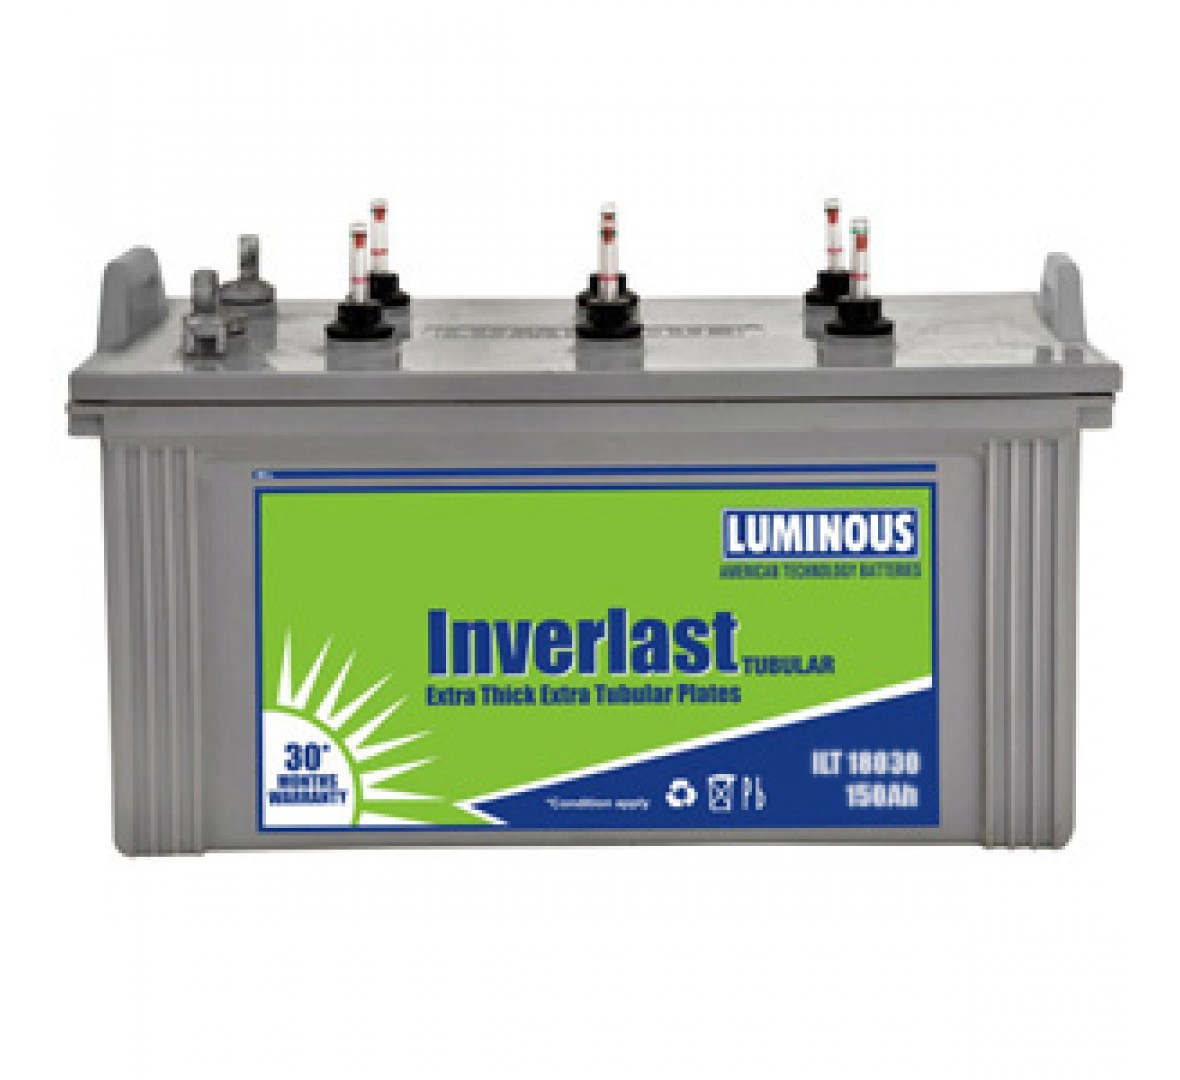 Chaudhary Batteries & Electricals